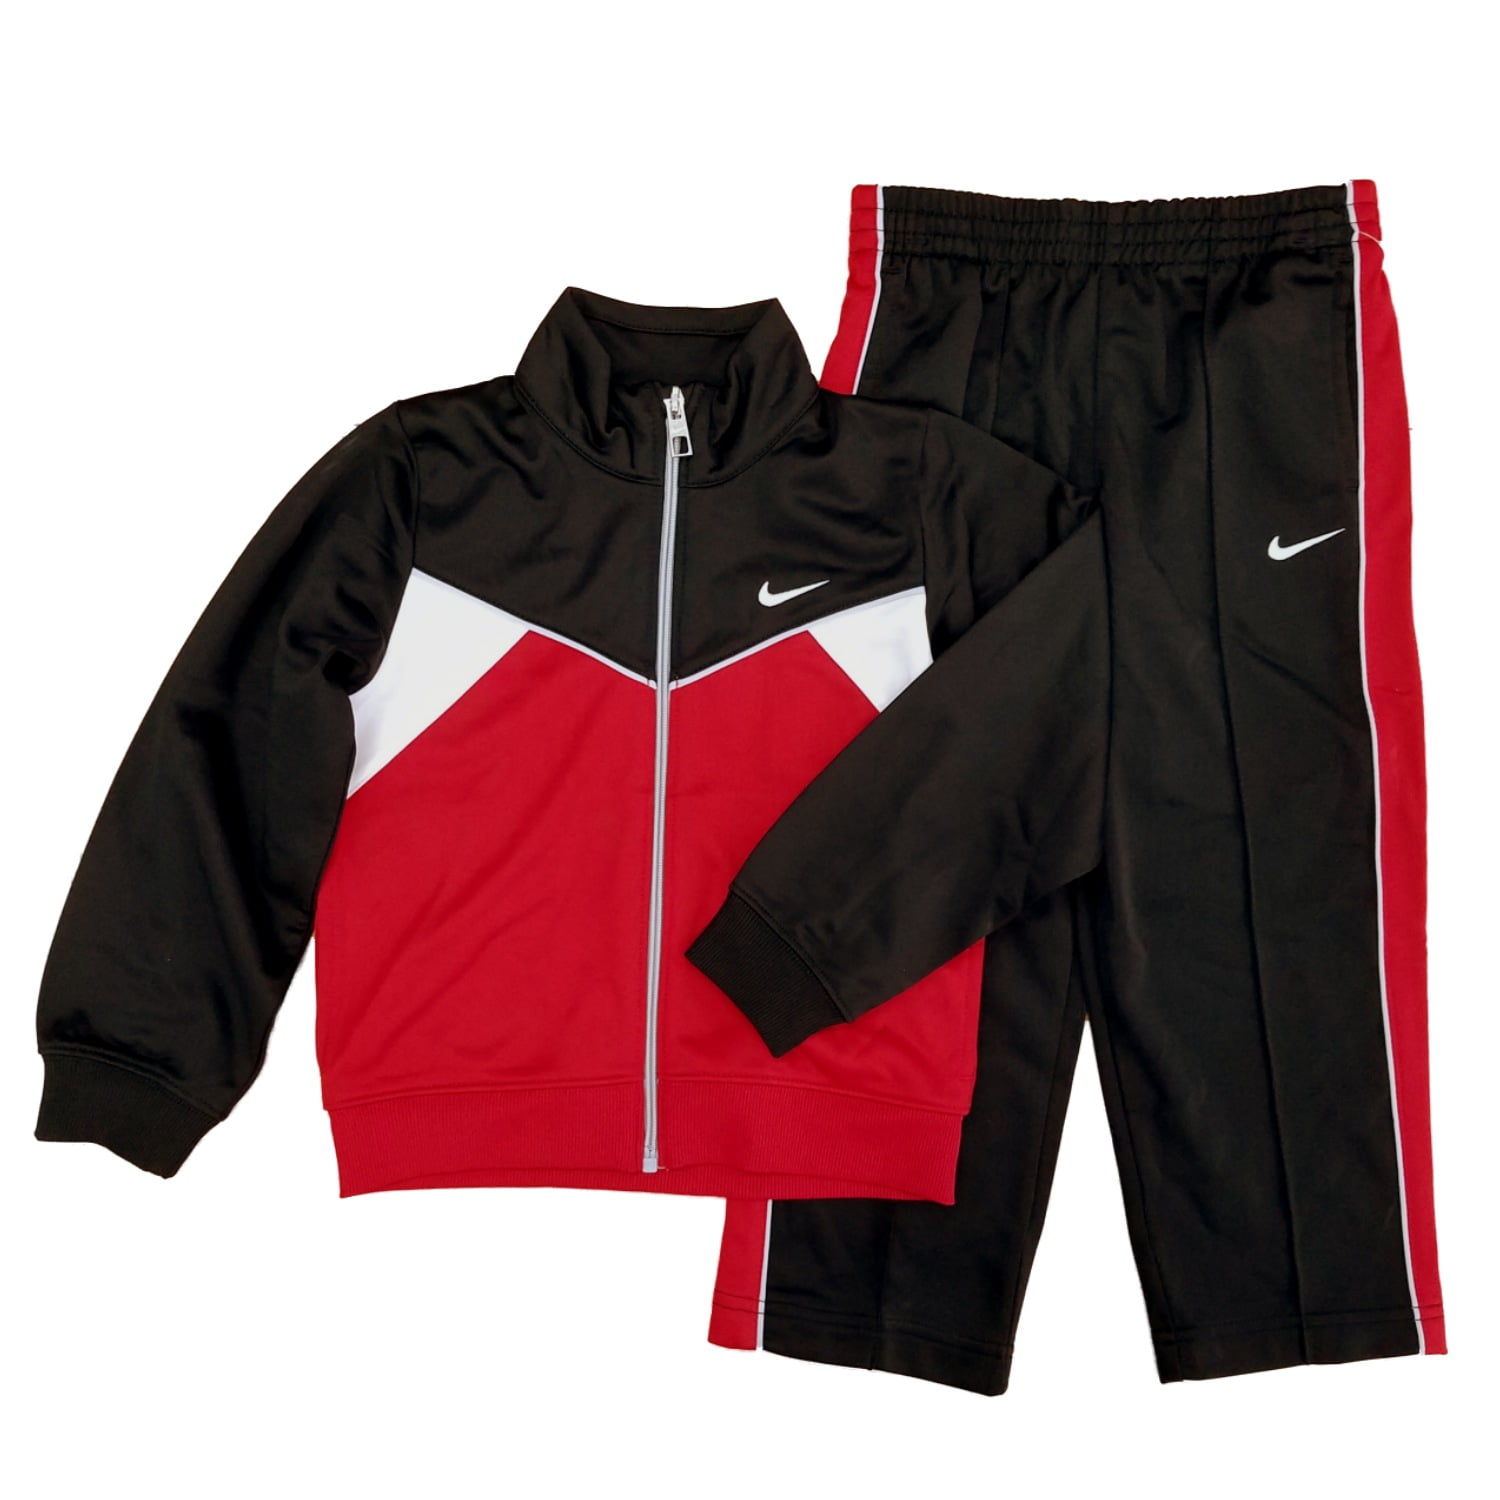 nike sweatsuit black and red